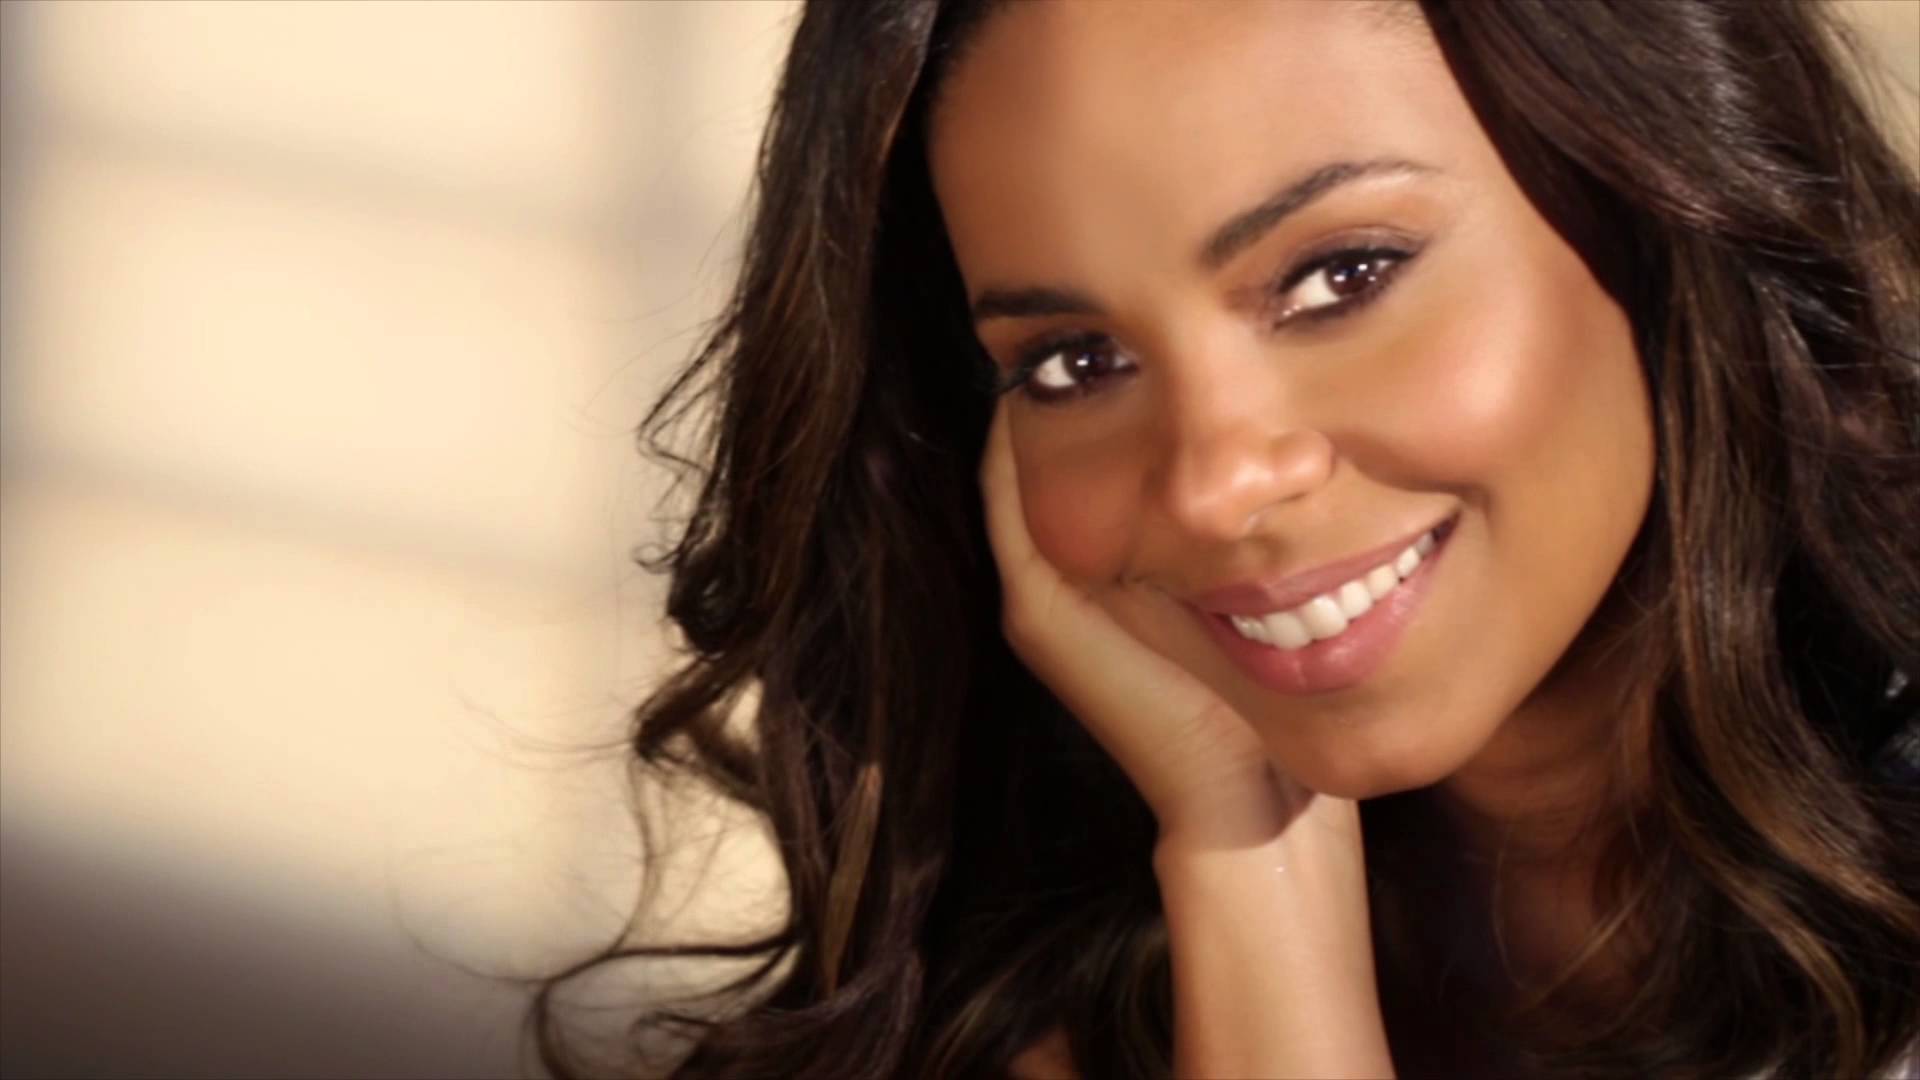 Sanaa Lathan Wallpaper Image Photo Picture Background